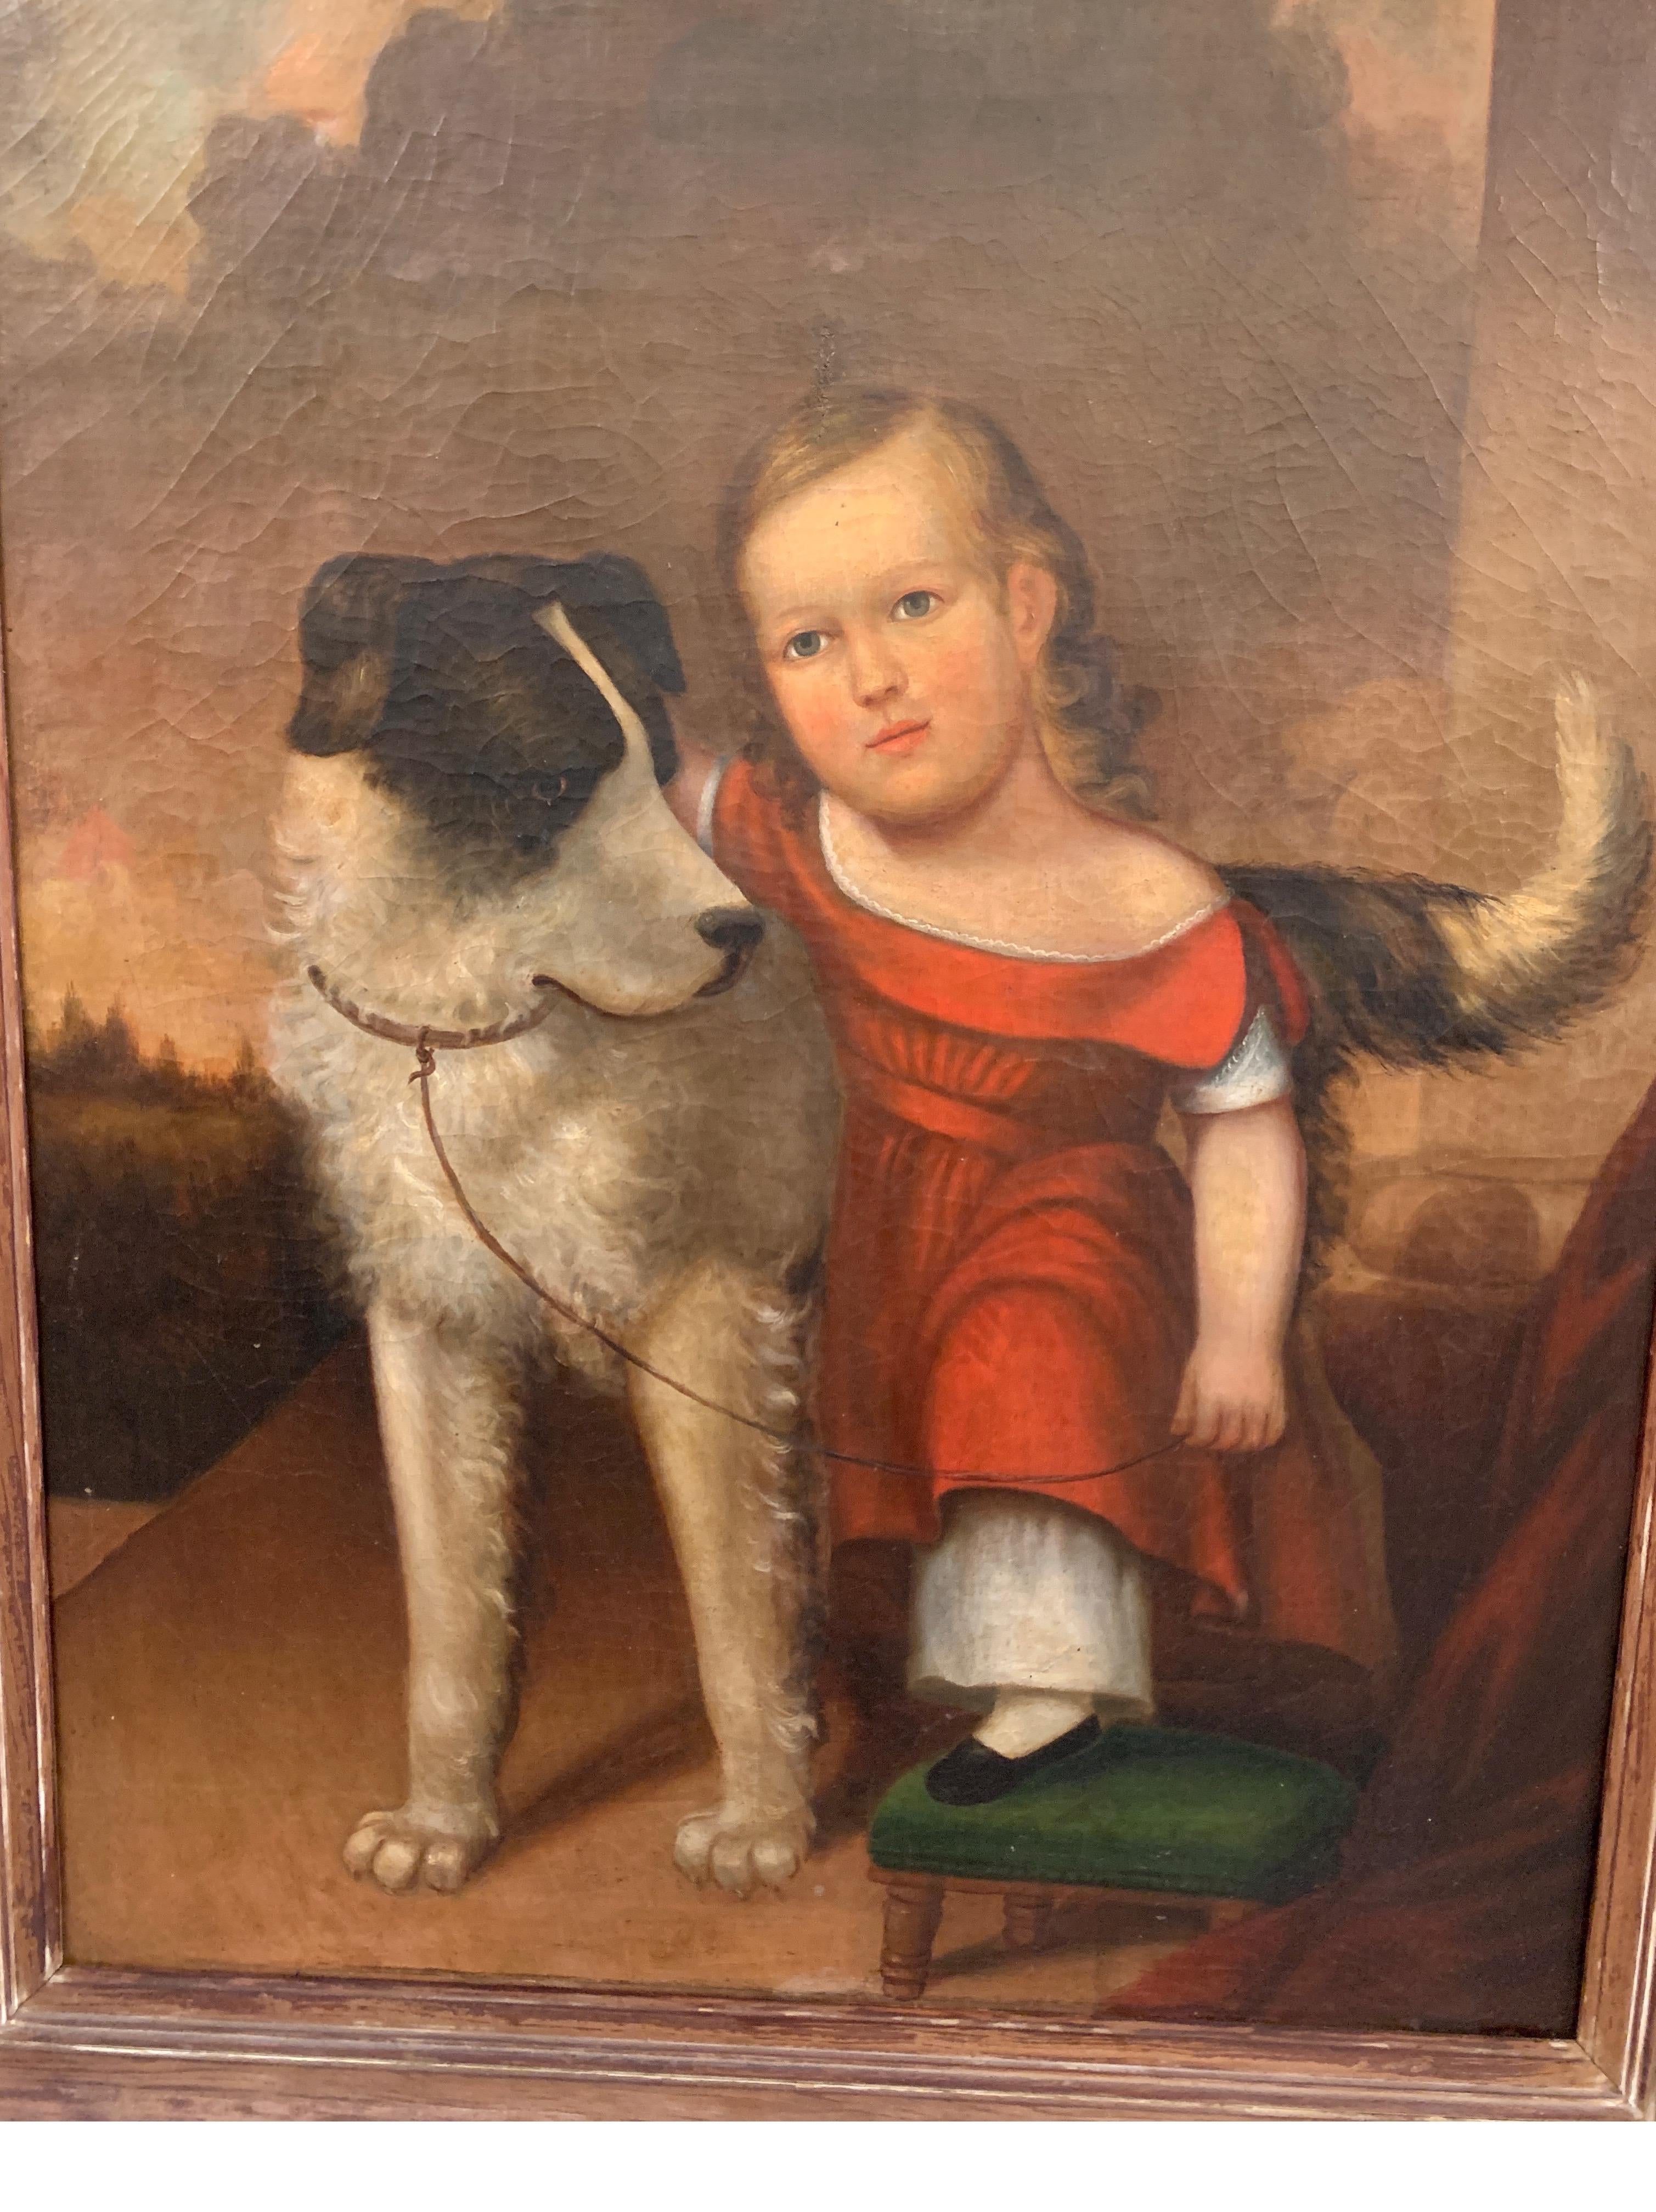 Painted Early 19th Century Oil on Canvas of Child with Dog